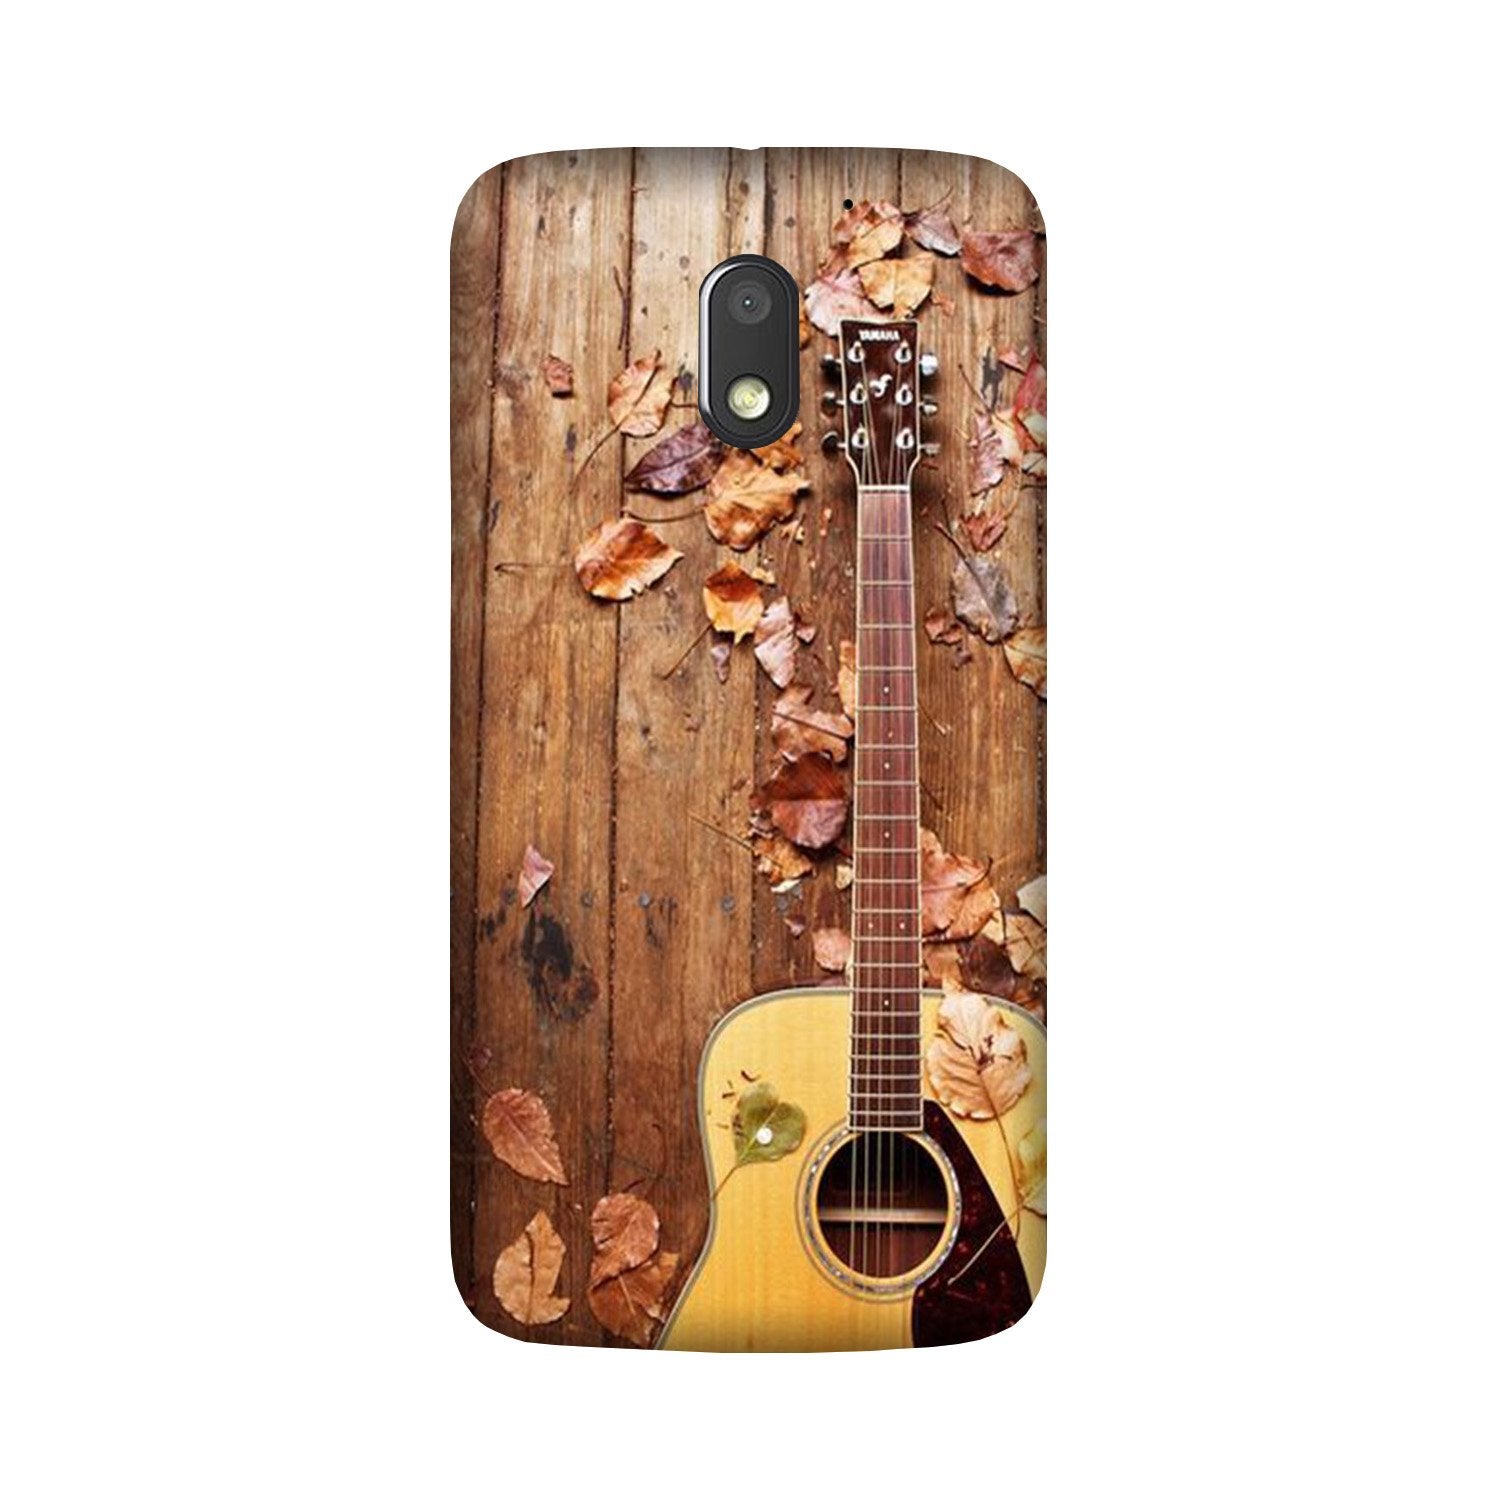 Guitar Case for Moto G4 Play